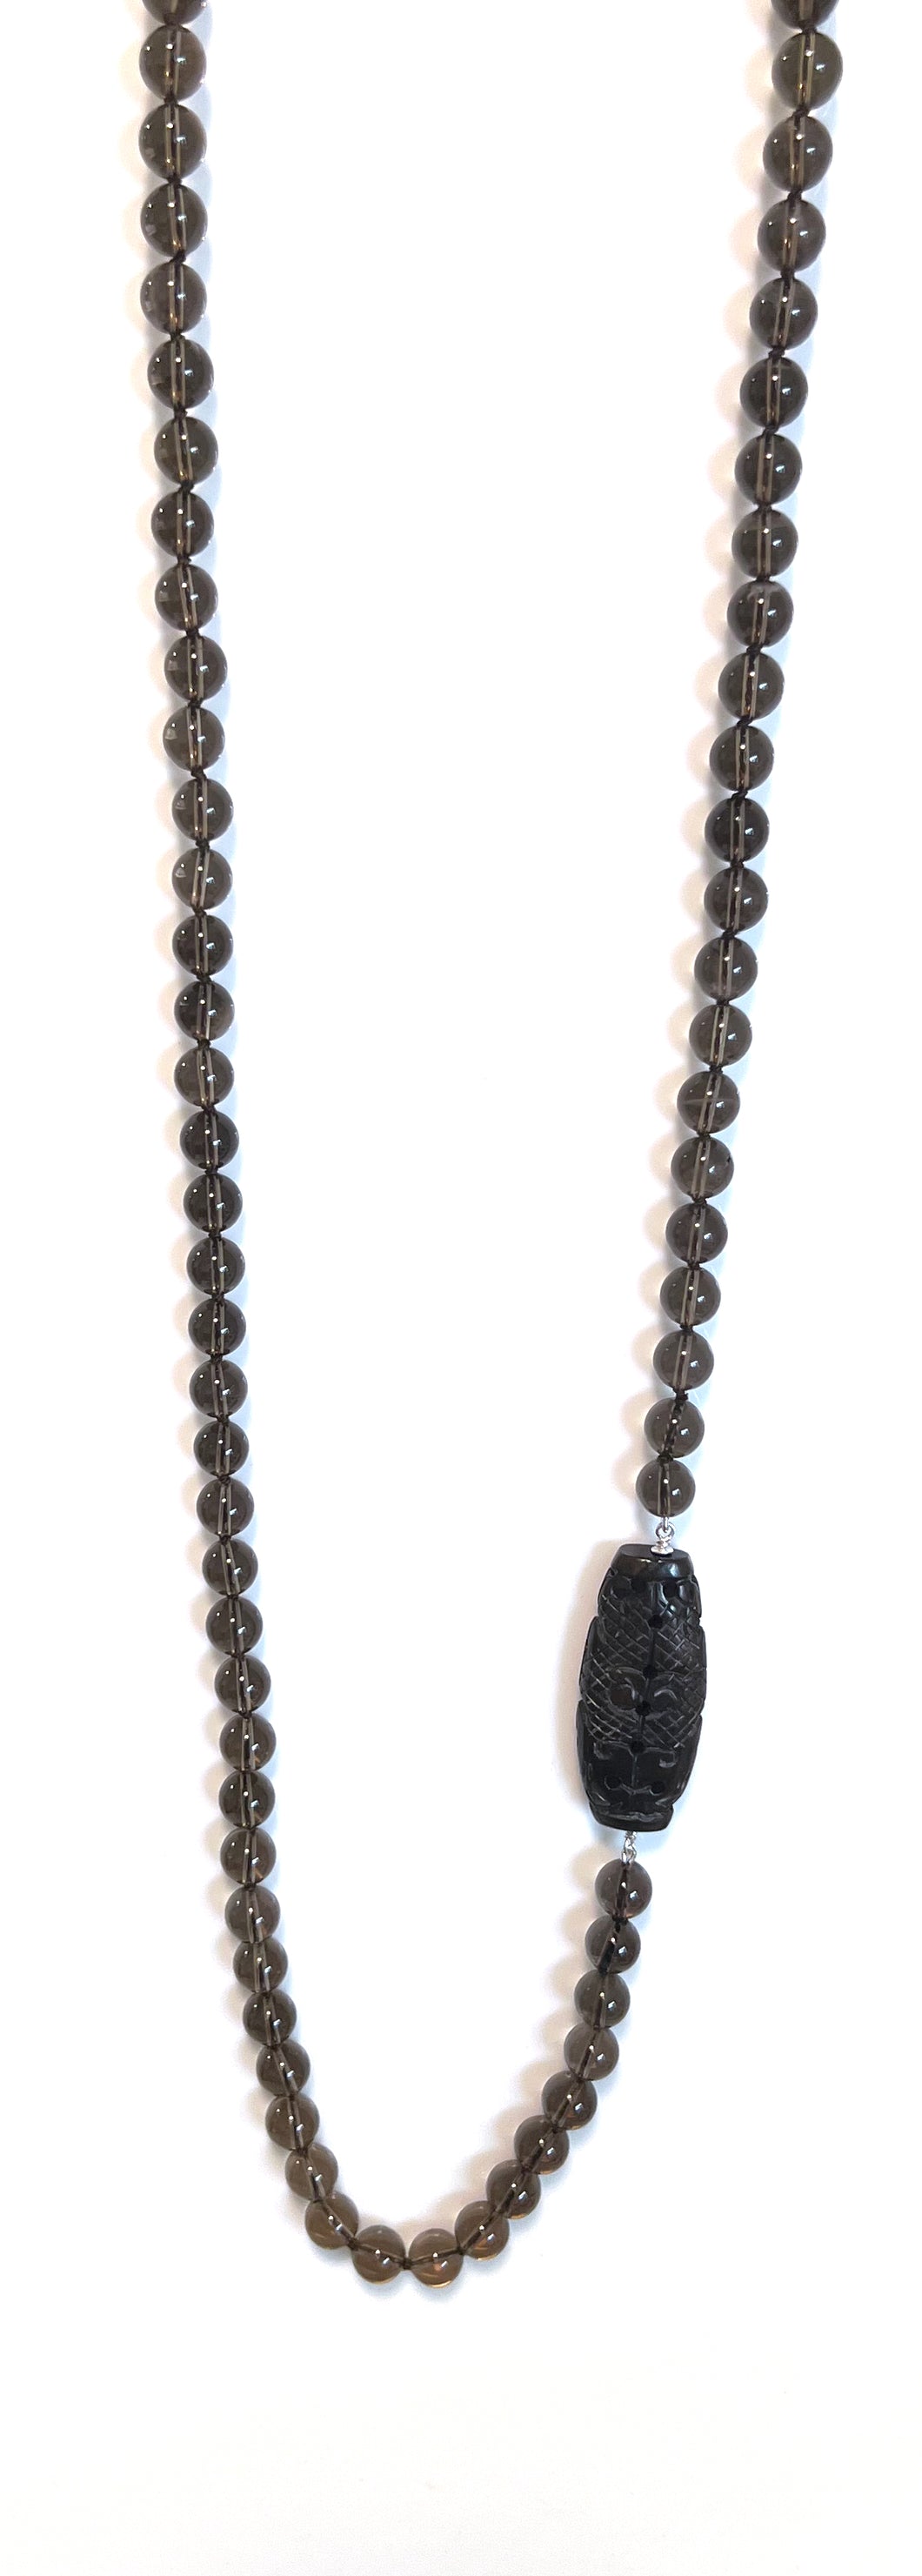 Australian Handmade Brown Necklace with Smoky Quartz and Carved Jade